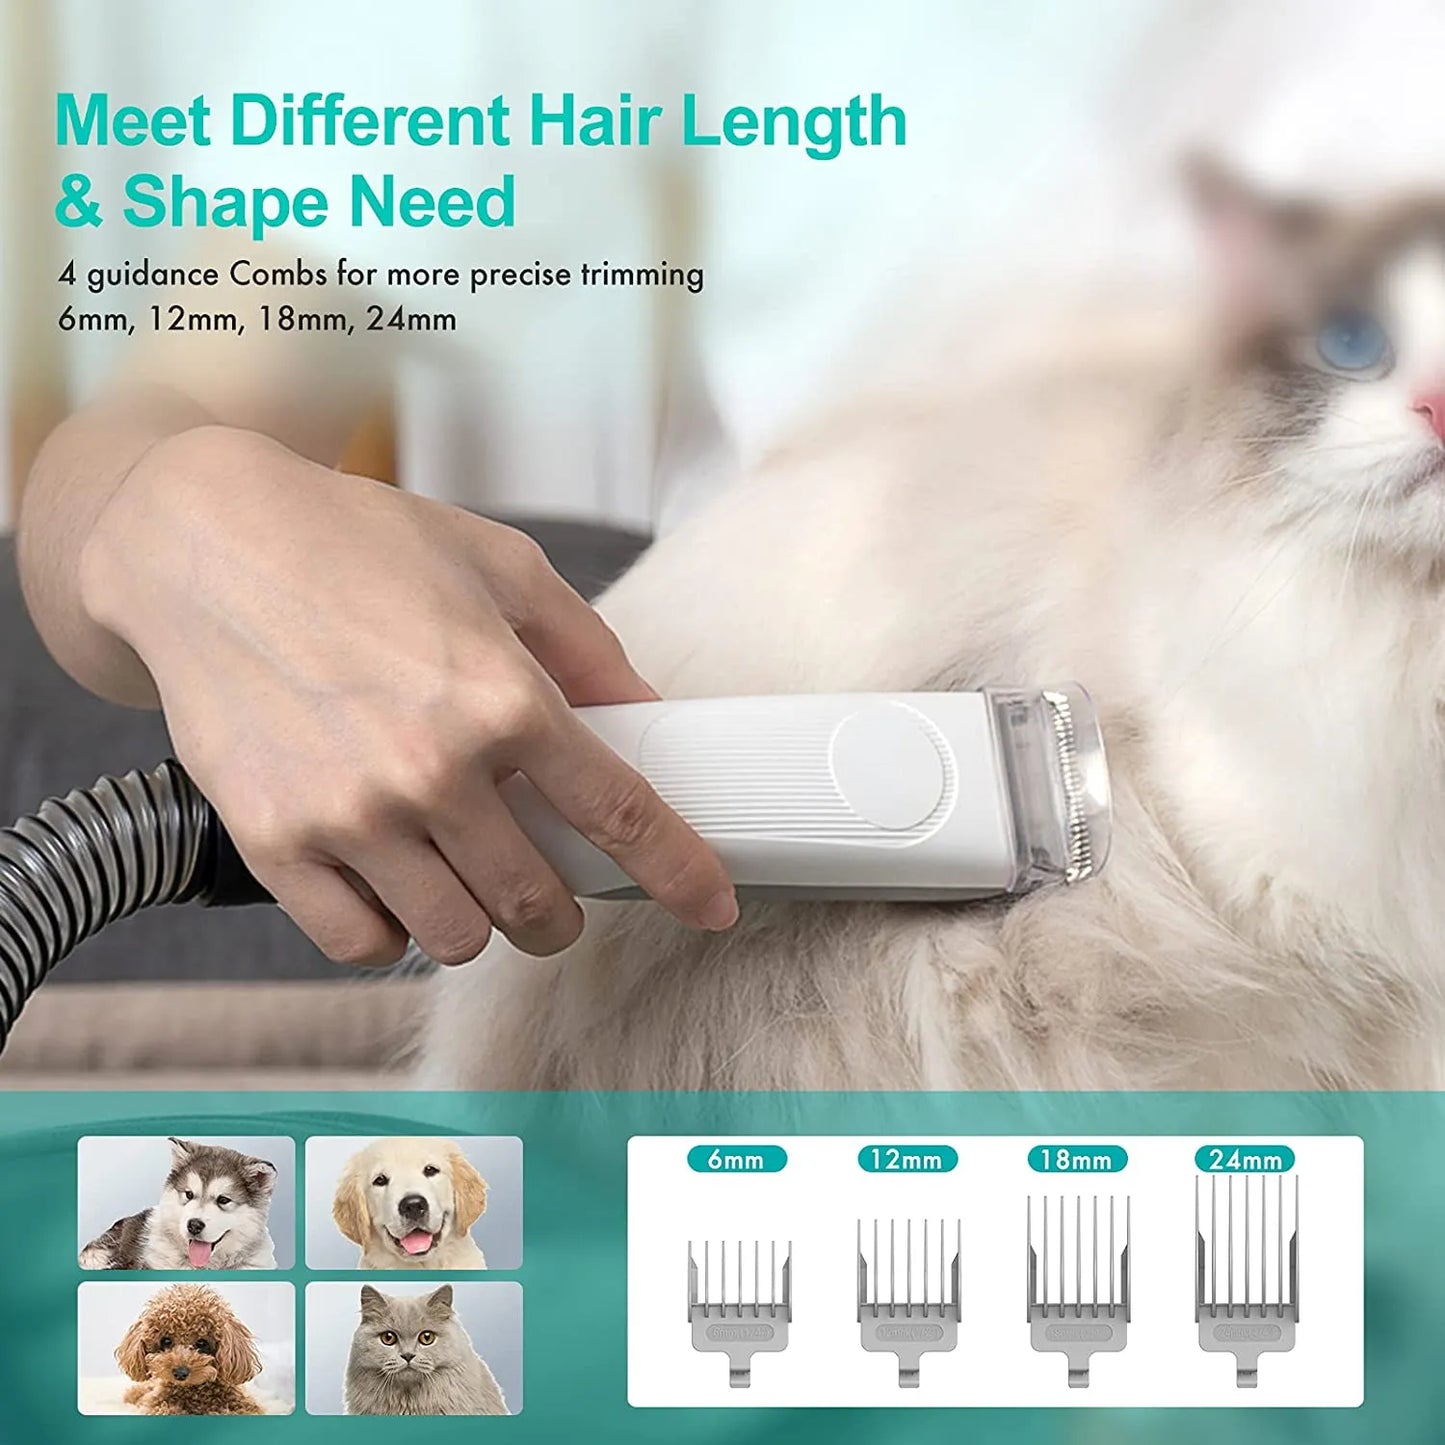 Pet Grooming Kit & Vacuum Suction with 5 Proven Grooming Tools for Dogs Cats or Other Animals